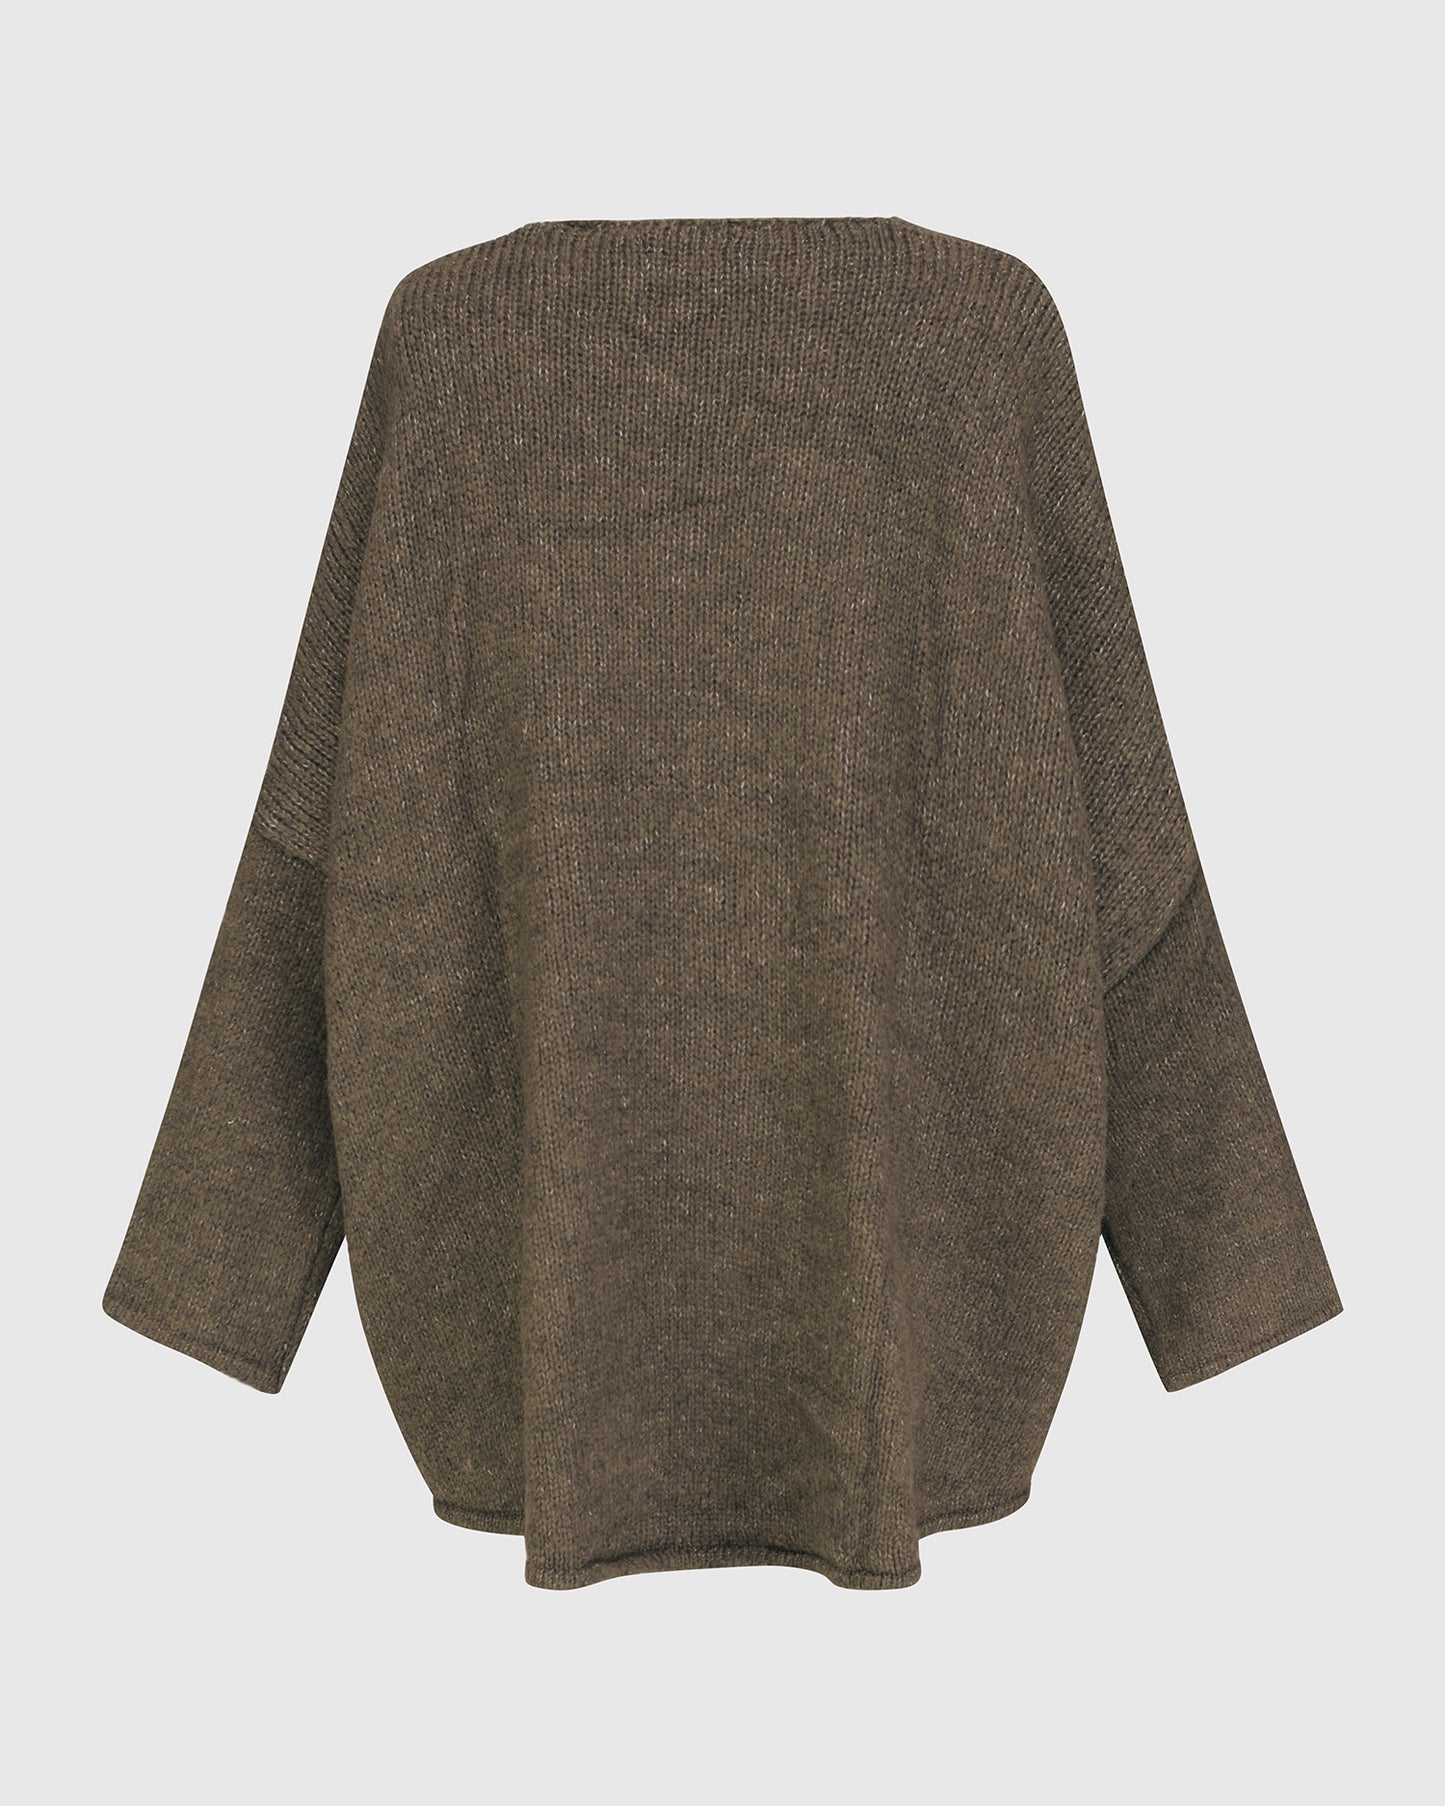 Taupe sweater